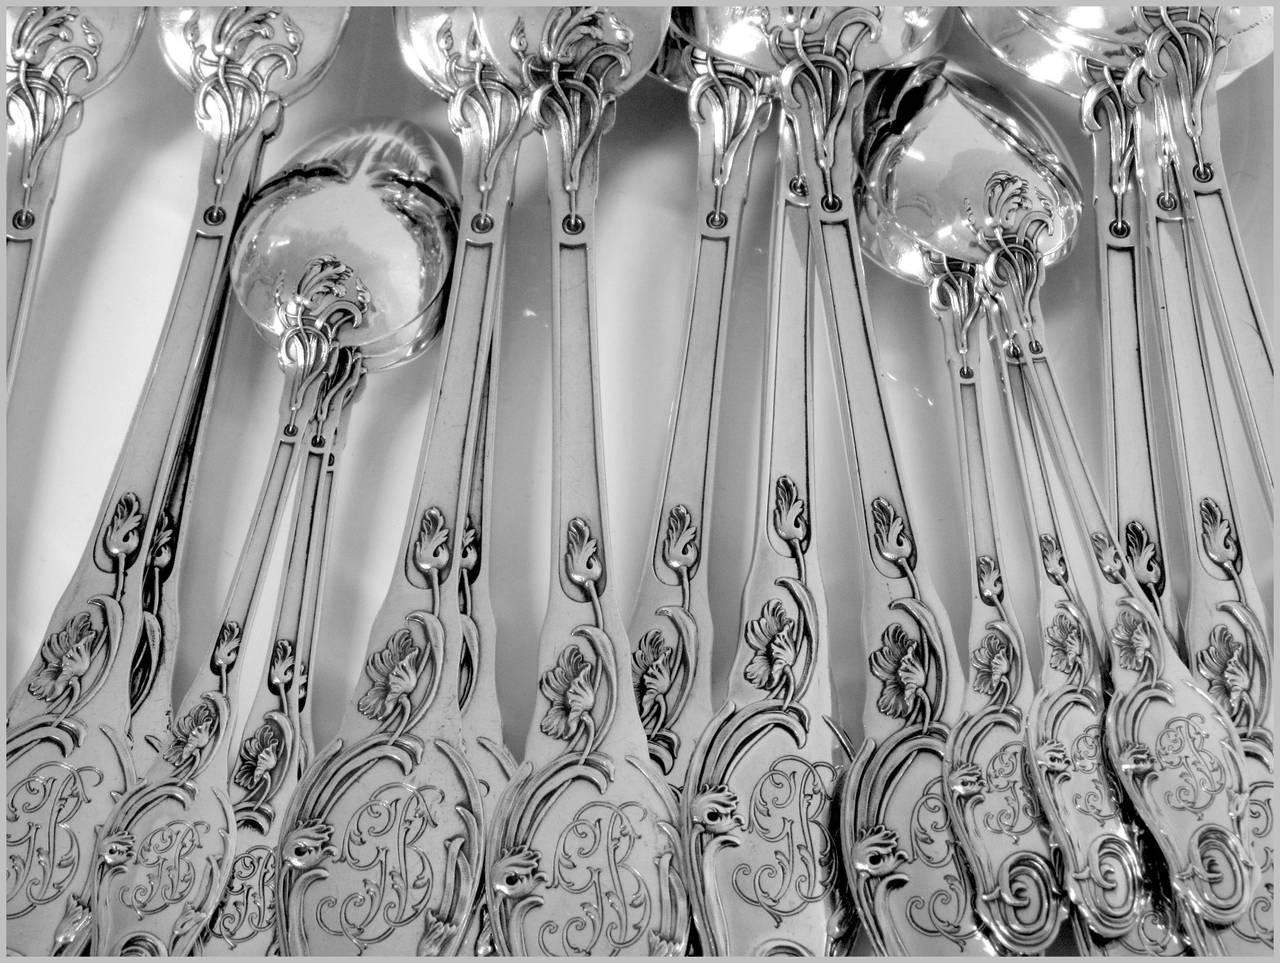 Head of Minerve 1 st titre for 950/1000 French sterling silver guarantee

The design and workmanship of this set is exceptional. The handles have sophisticated and unusual Art Nouveau pattern with poppies and foliage.

To complete this set, check